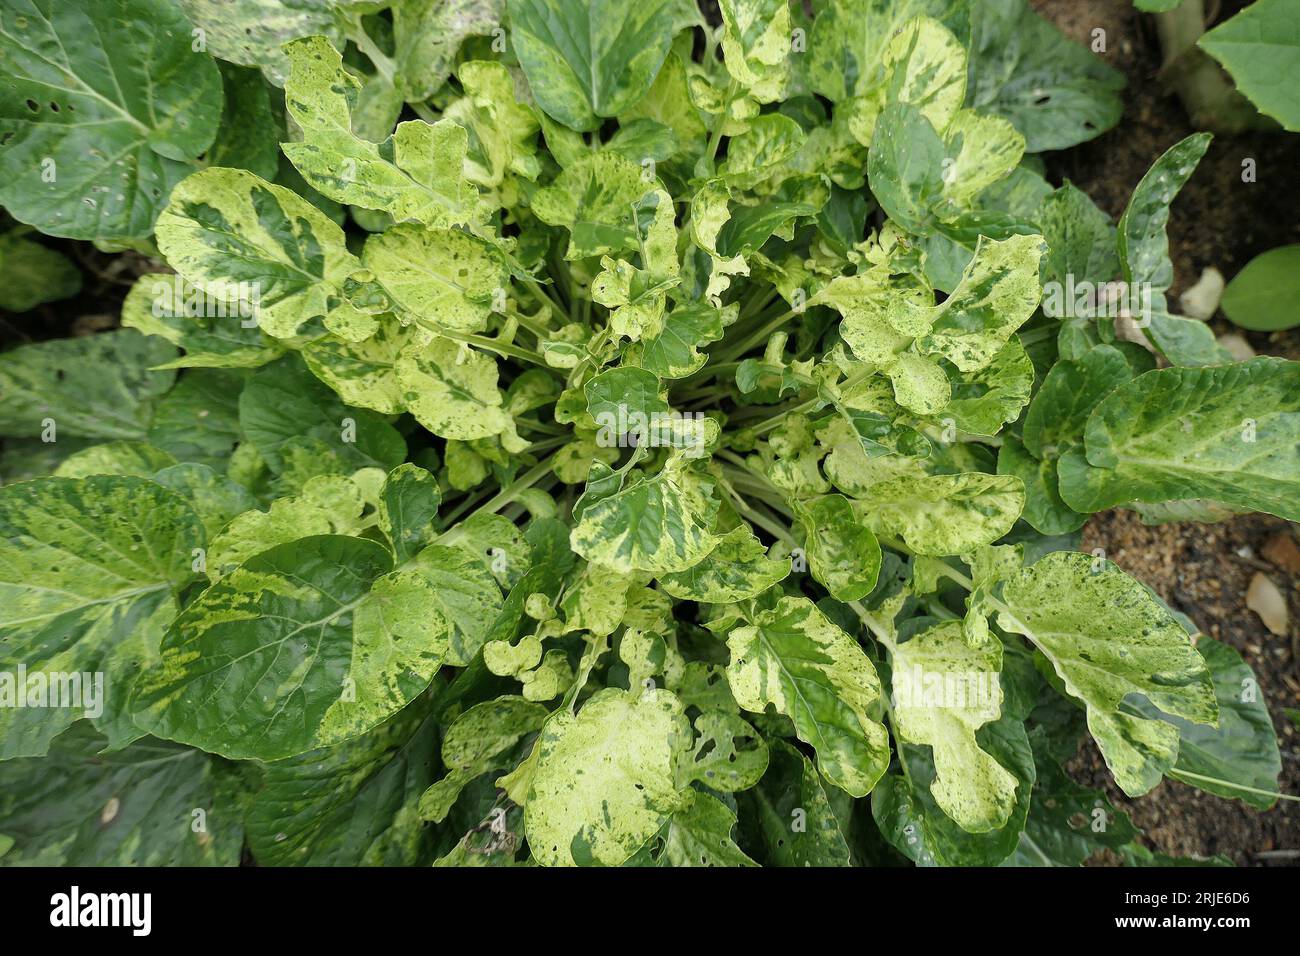 Closeup of the biennial leafy edible vegetable plant with green variegated leaves barbarea verna or american land cress. Stock Photo